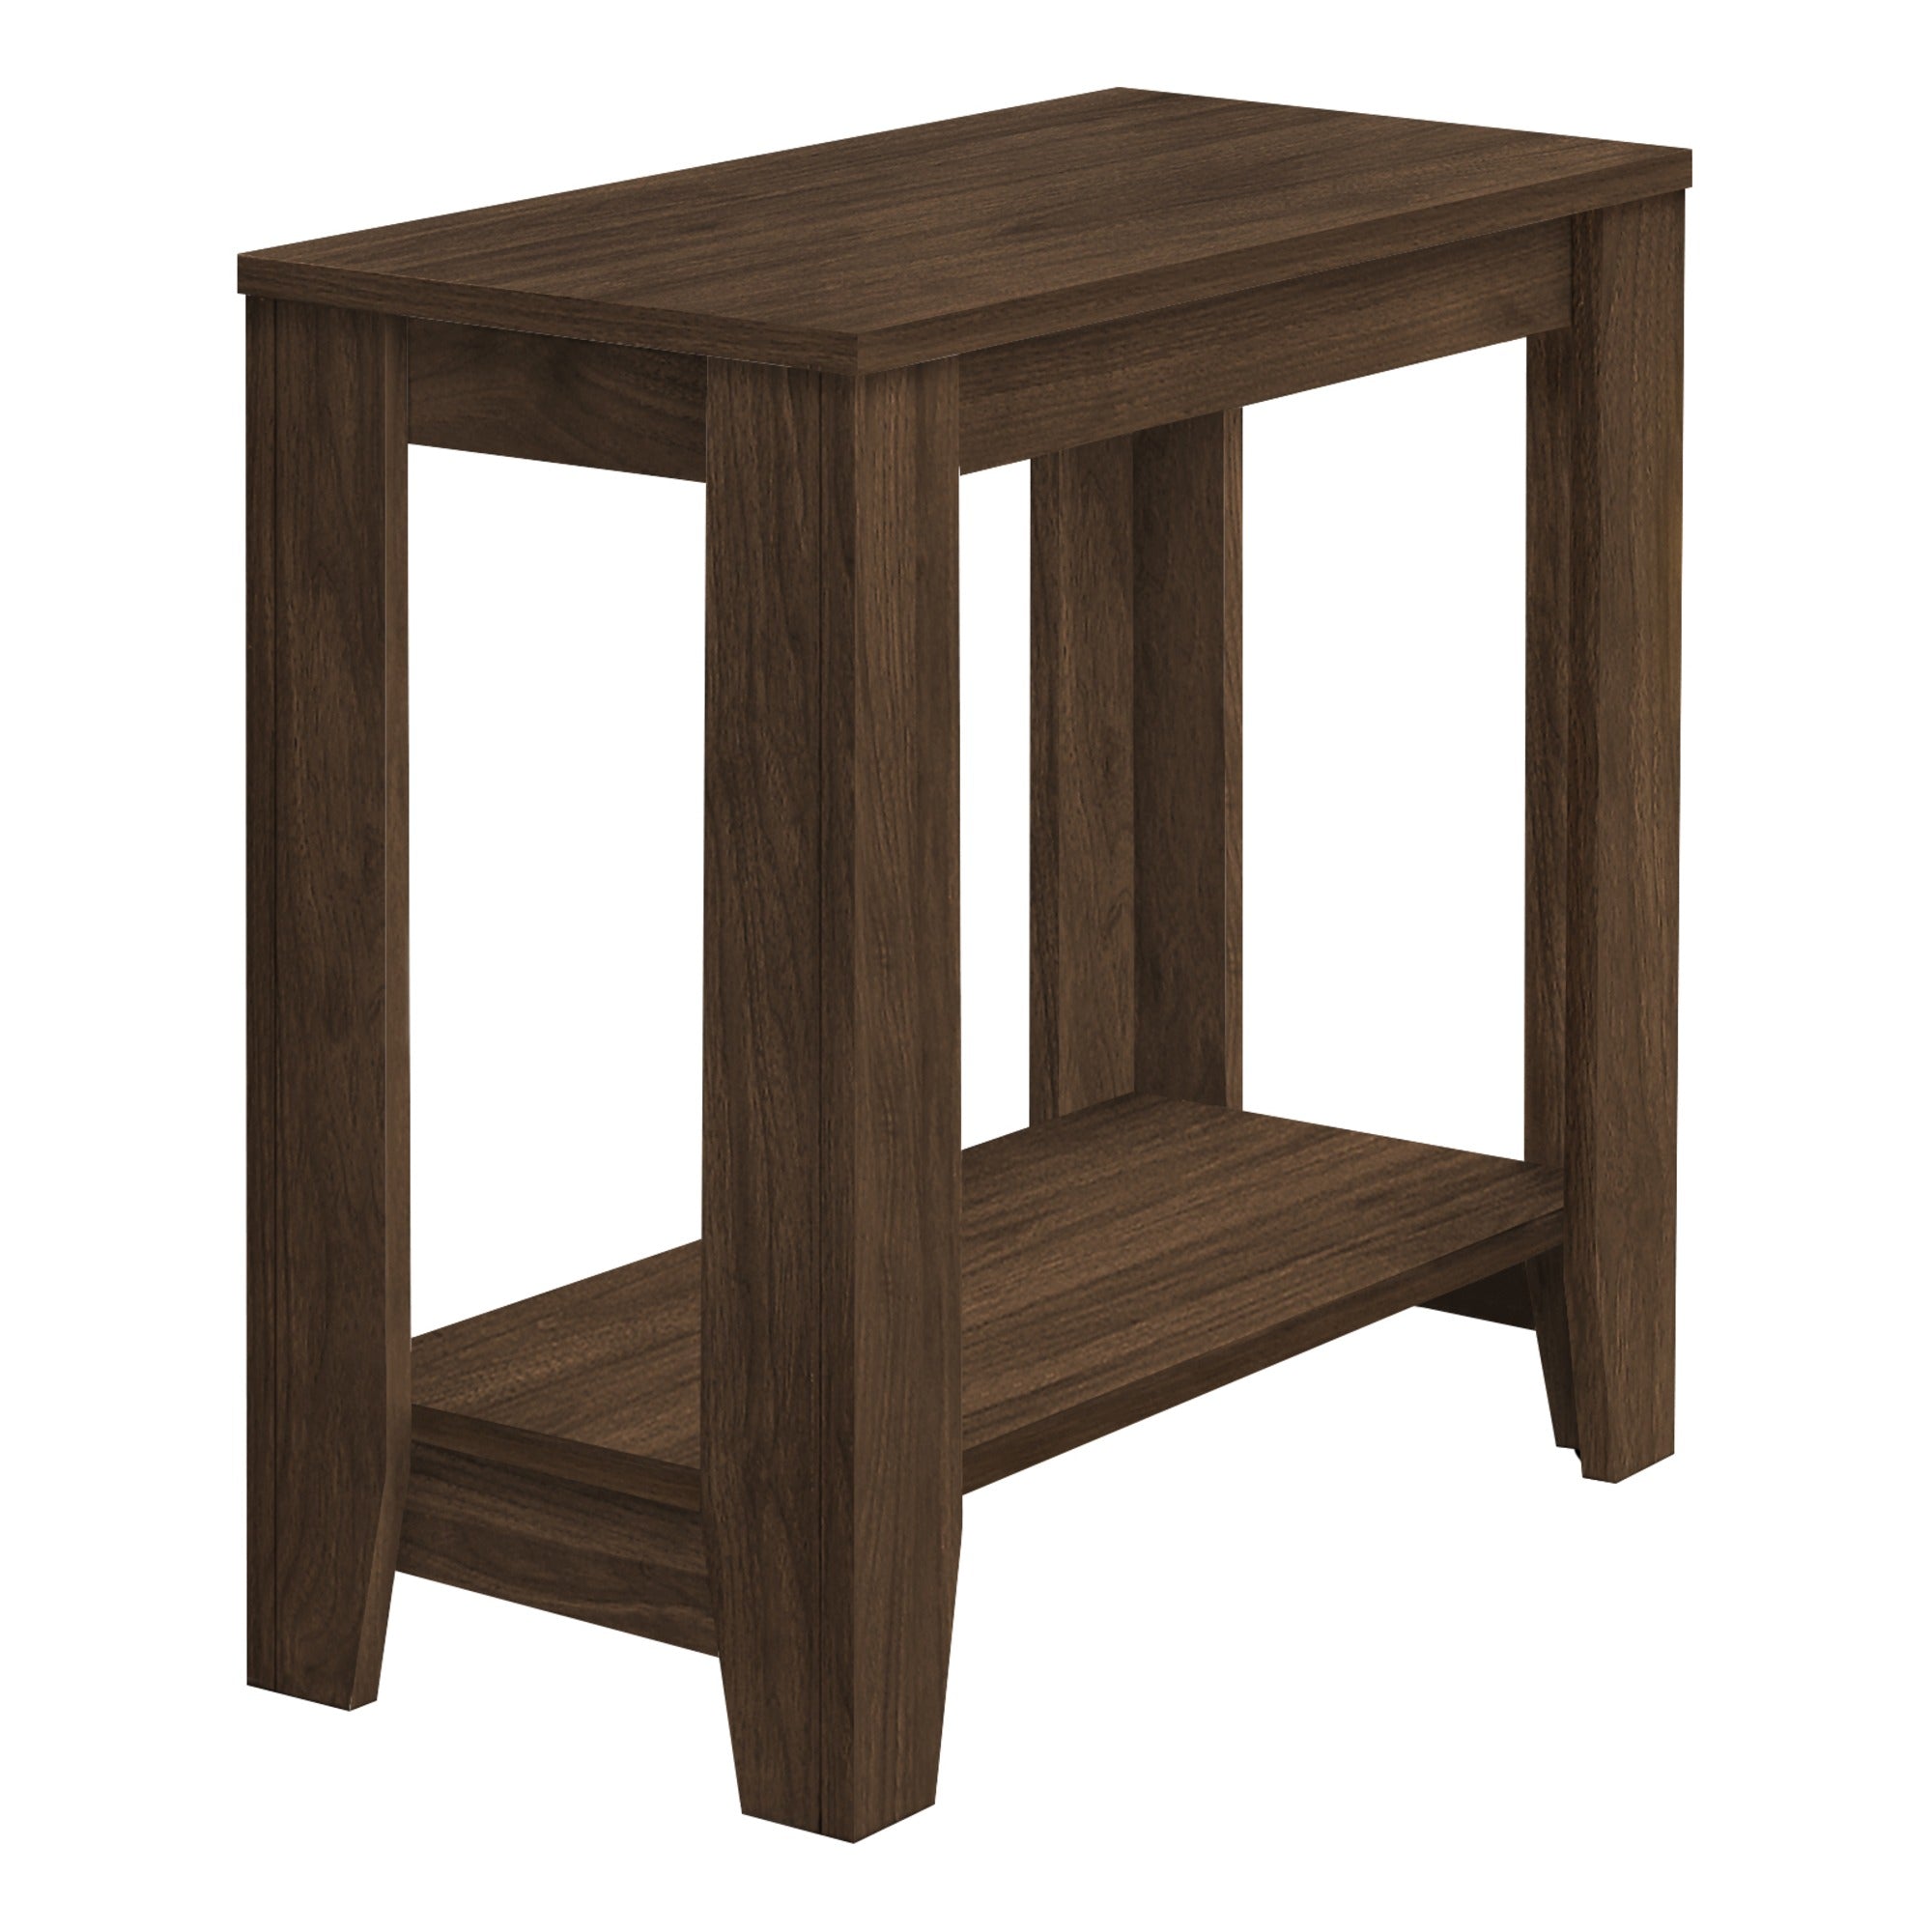 ACCENT TABLE - DARK TAUPE